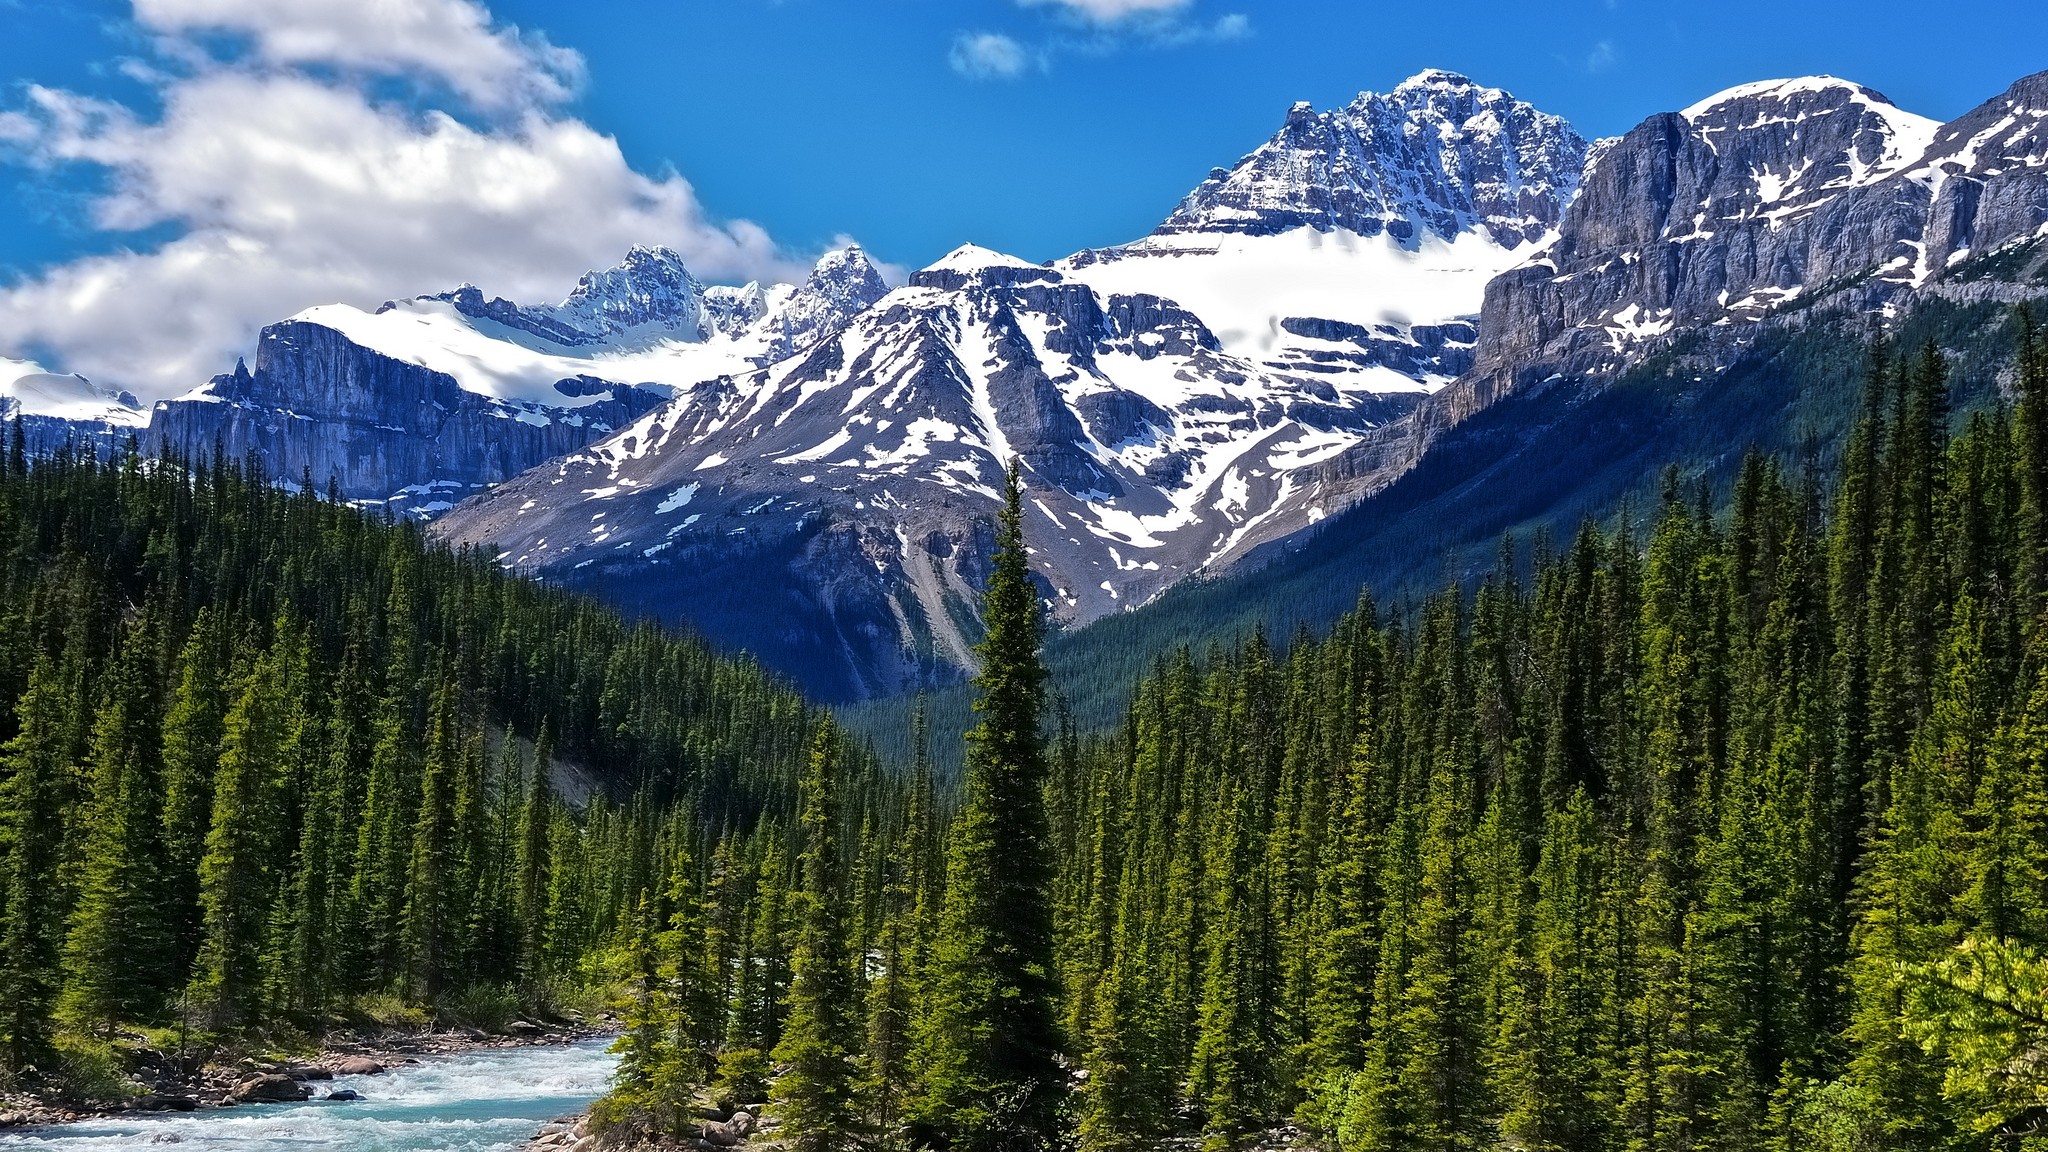 green, Water, Mountains, Clouds, Landscapes, Nature, Snow, Trees, White, Forests, Canada, Alberta, Rivers, National, Park, Light, Blue, Canadian, Rockies Wallpaper